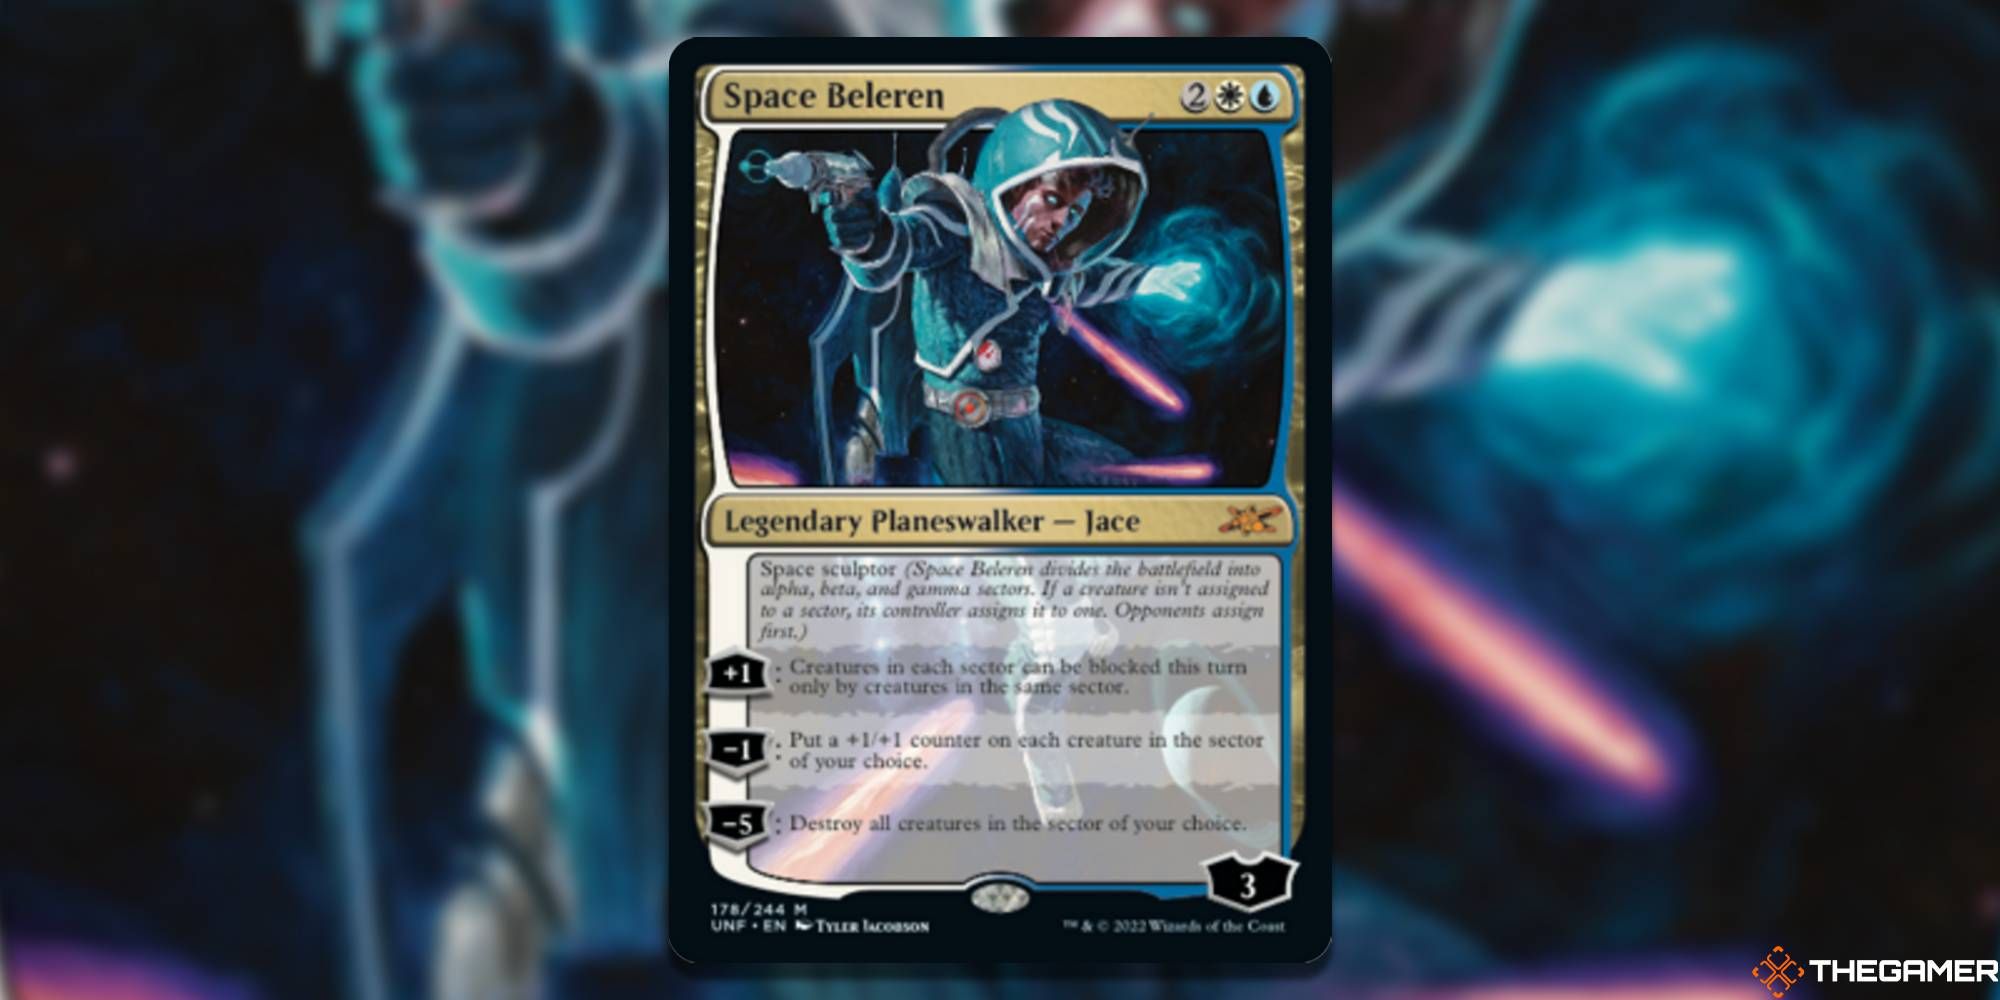 Image of the Space Beleren card in Magic: The Gathering, with art by Tyler Jacobson